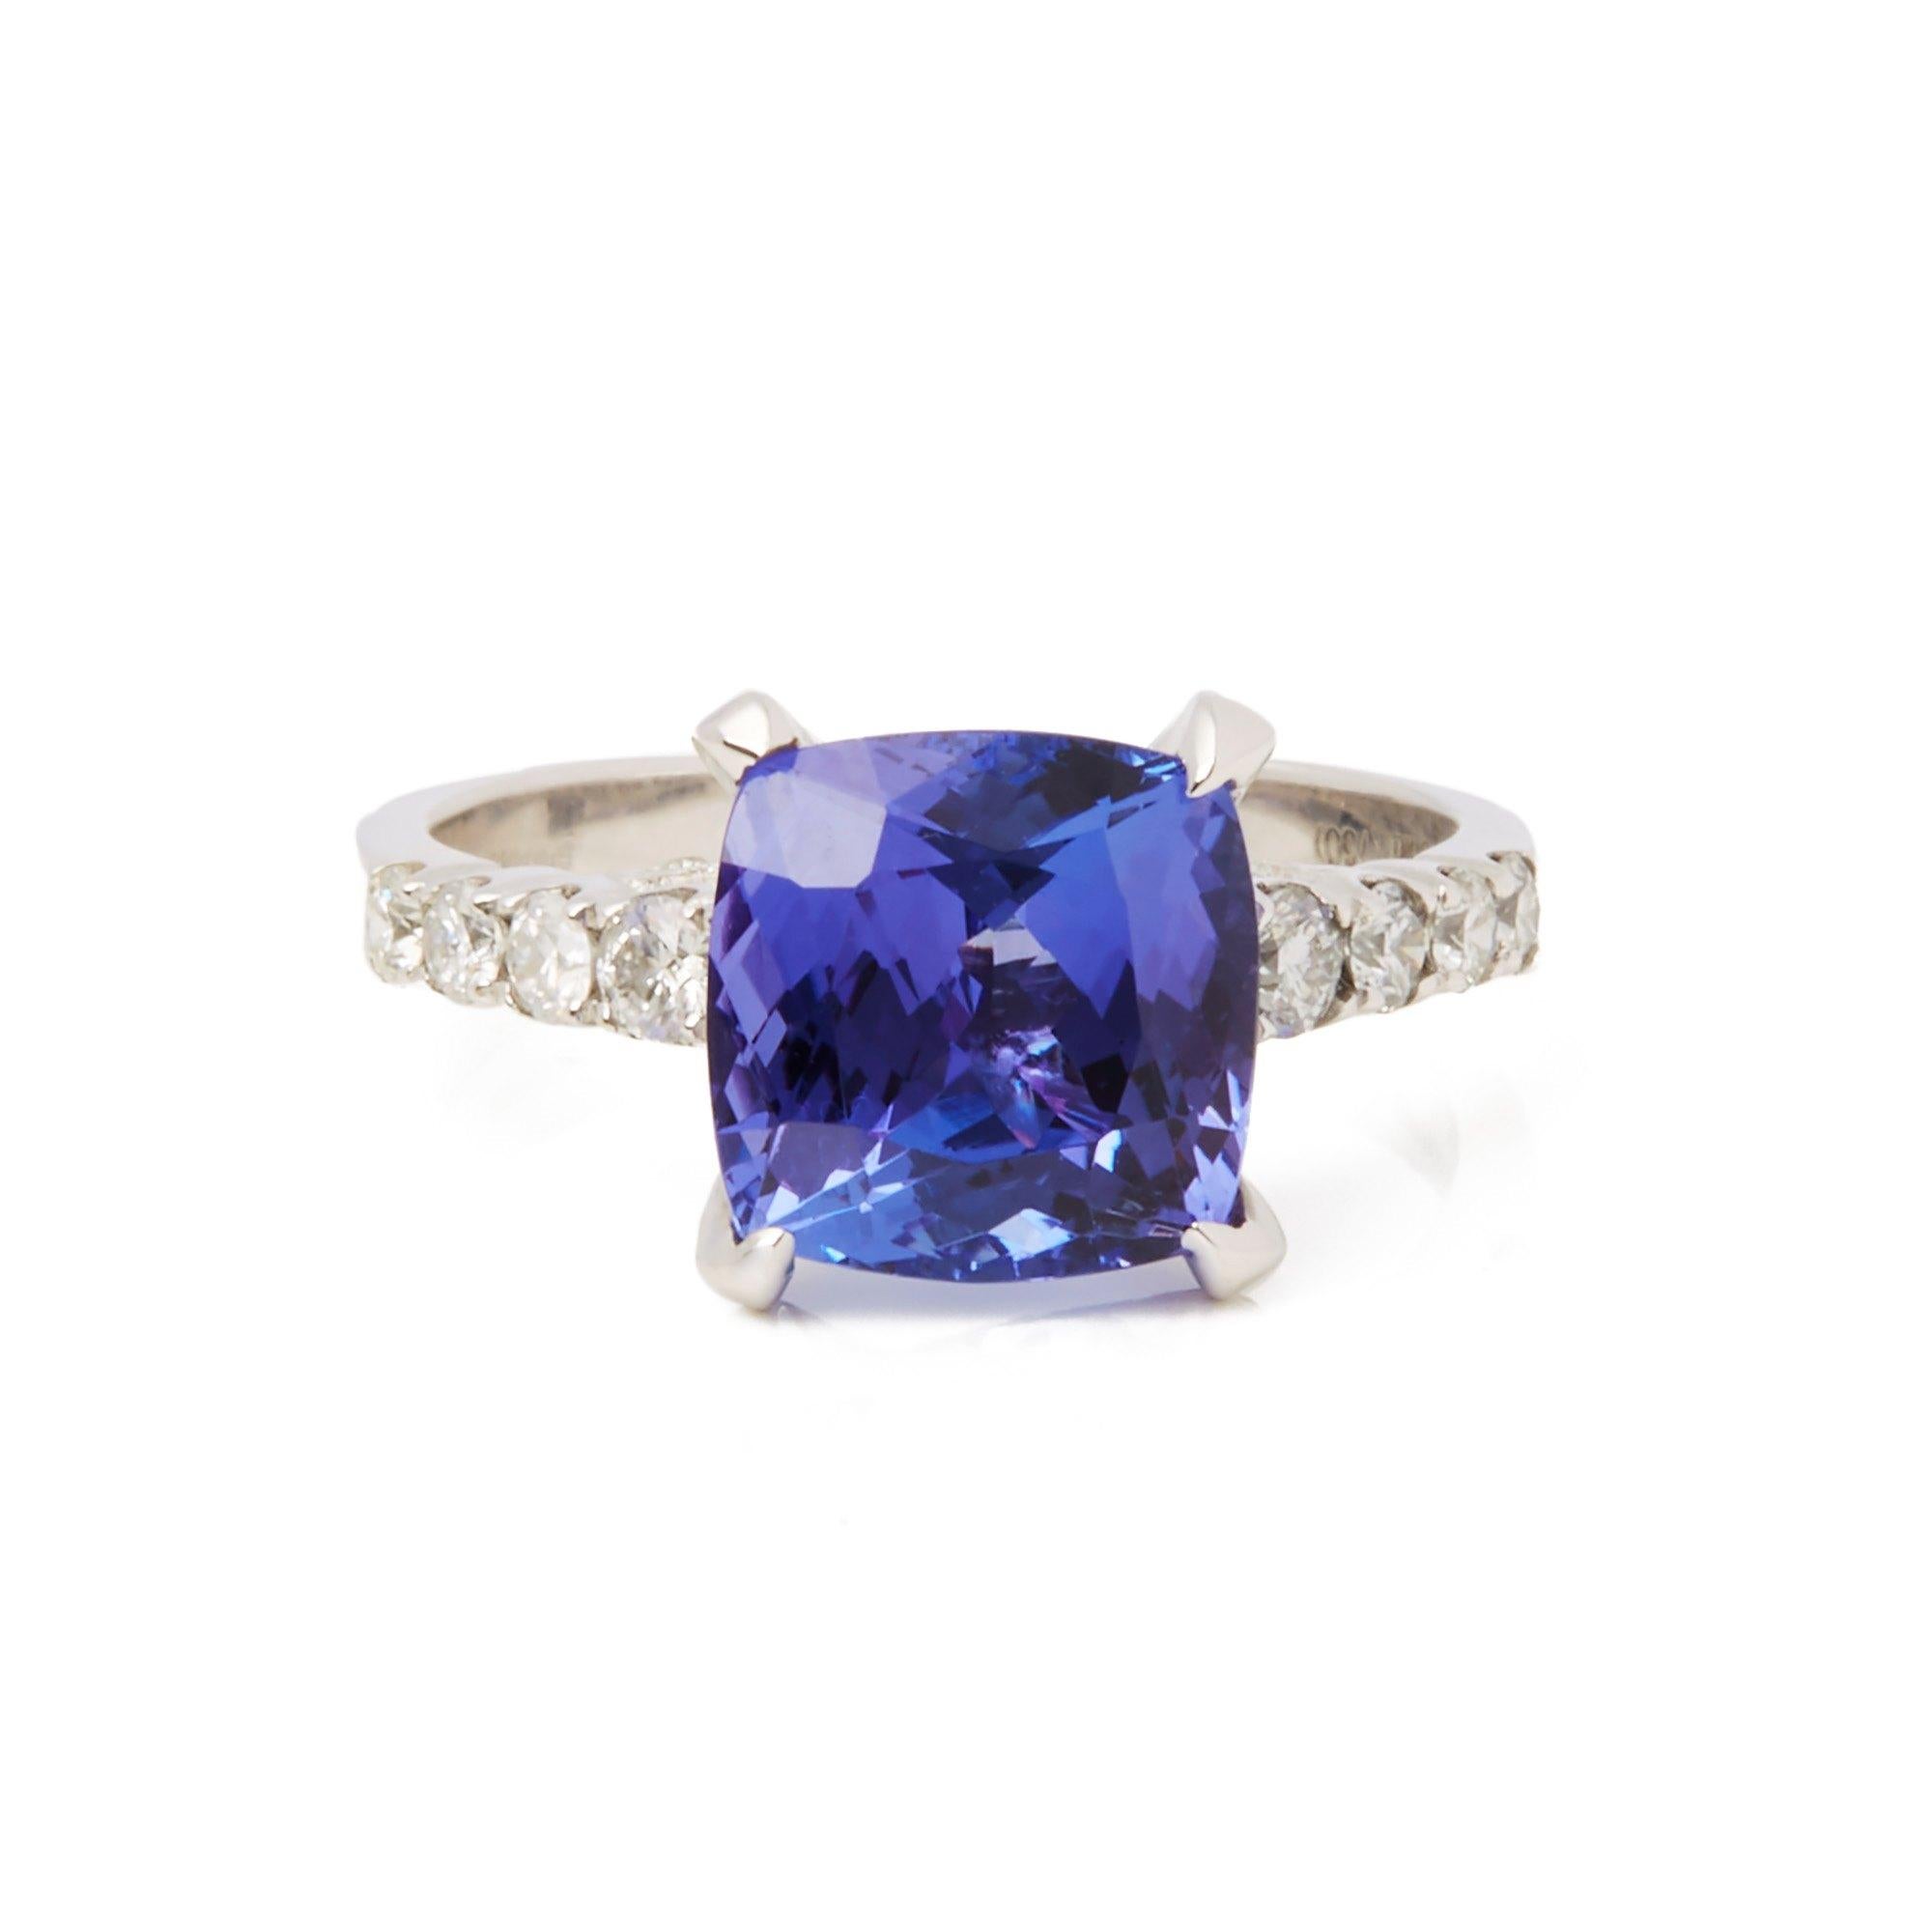 This ring designed by David Jerome is from his private collection and features one cushion cut Tanzanite sourced in the D block mine in Tanzania. Totalling 4.28cts set with round brilliant cut Diamonds totalling 0.57cts. Mounted in an 18k white gold